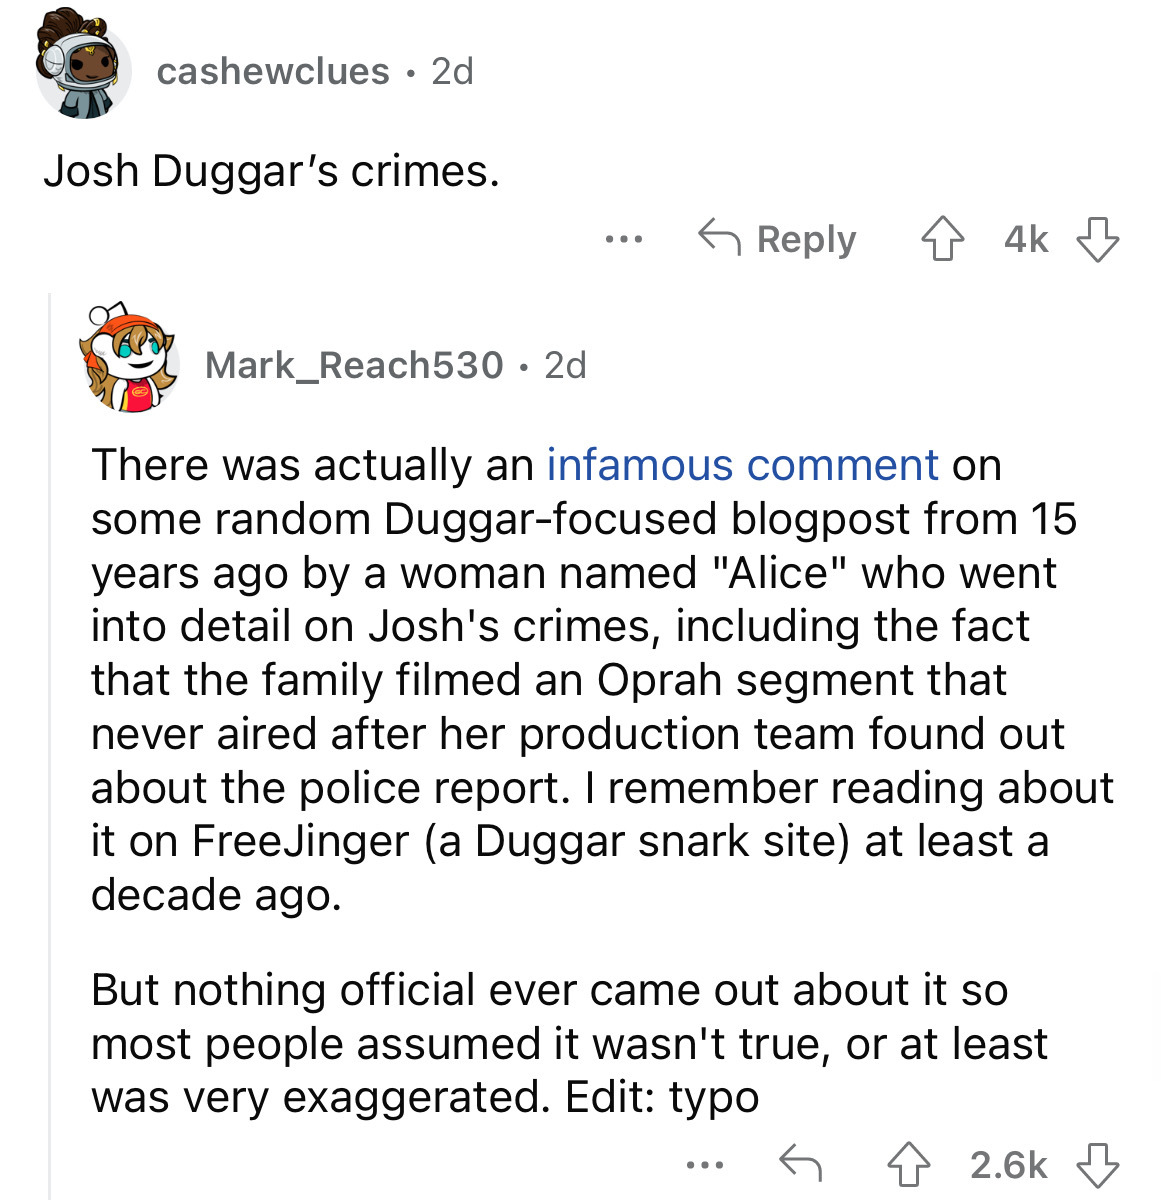 angle - cashewclues 2d Josh Duggar's crimes. Mark_Reach530 2d ... 4k There was actually an infamous comment on some random Duggarfocused blogpost from 15 years ago by a woman named "Alice" who went into detail on Josh's crimes, including the fact that the